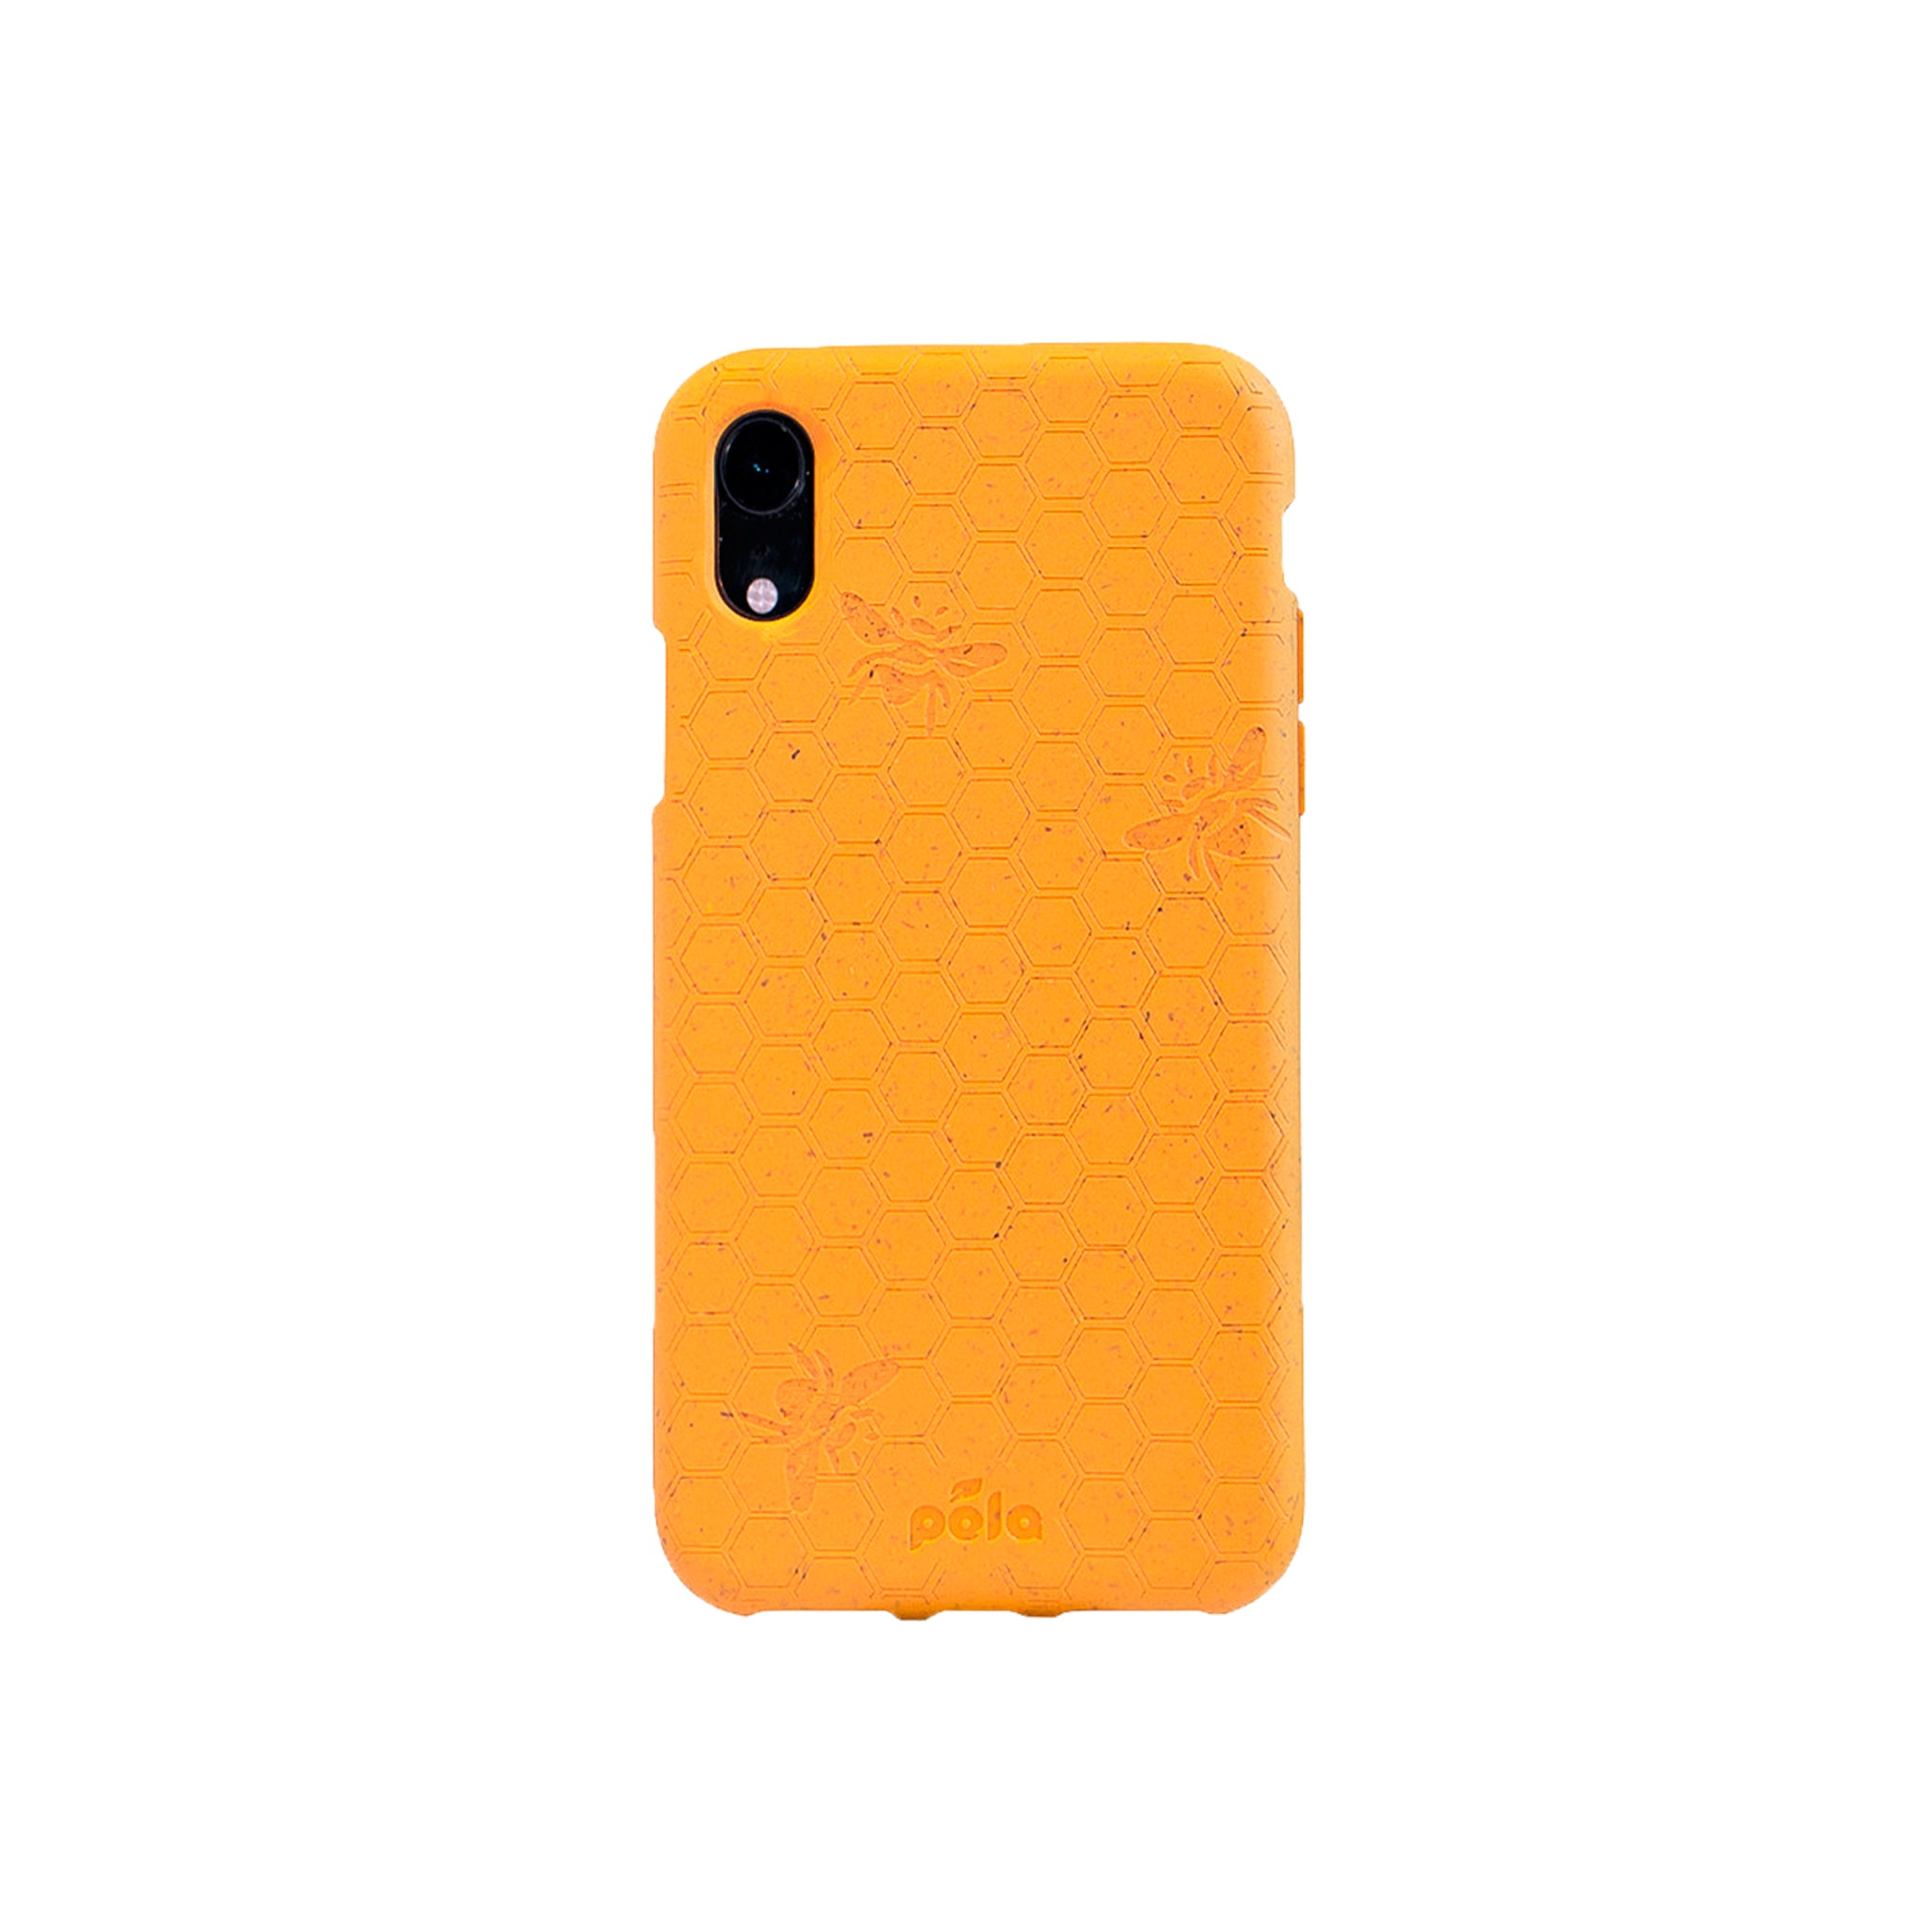 Pela - Eco Friendly Case For Apple Iphone Xr - Honey Bee Edition